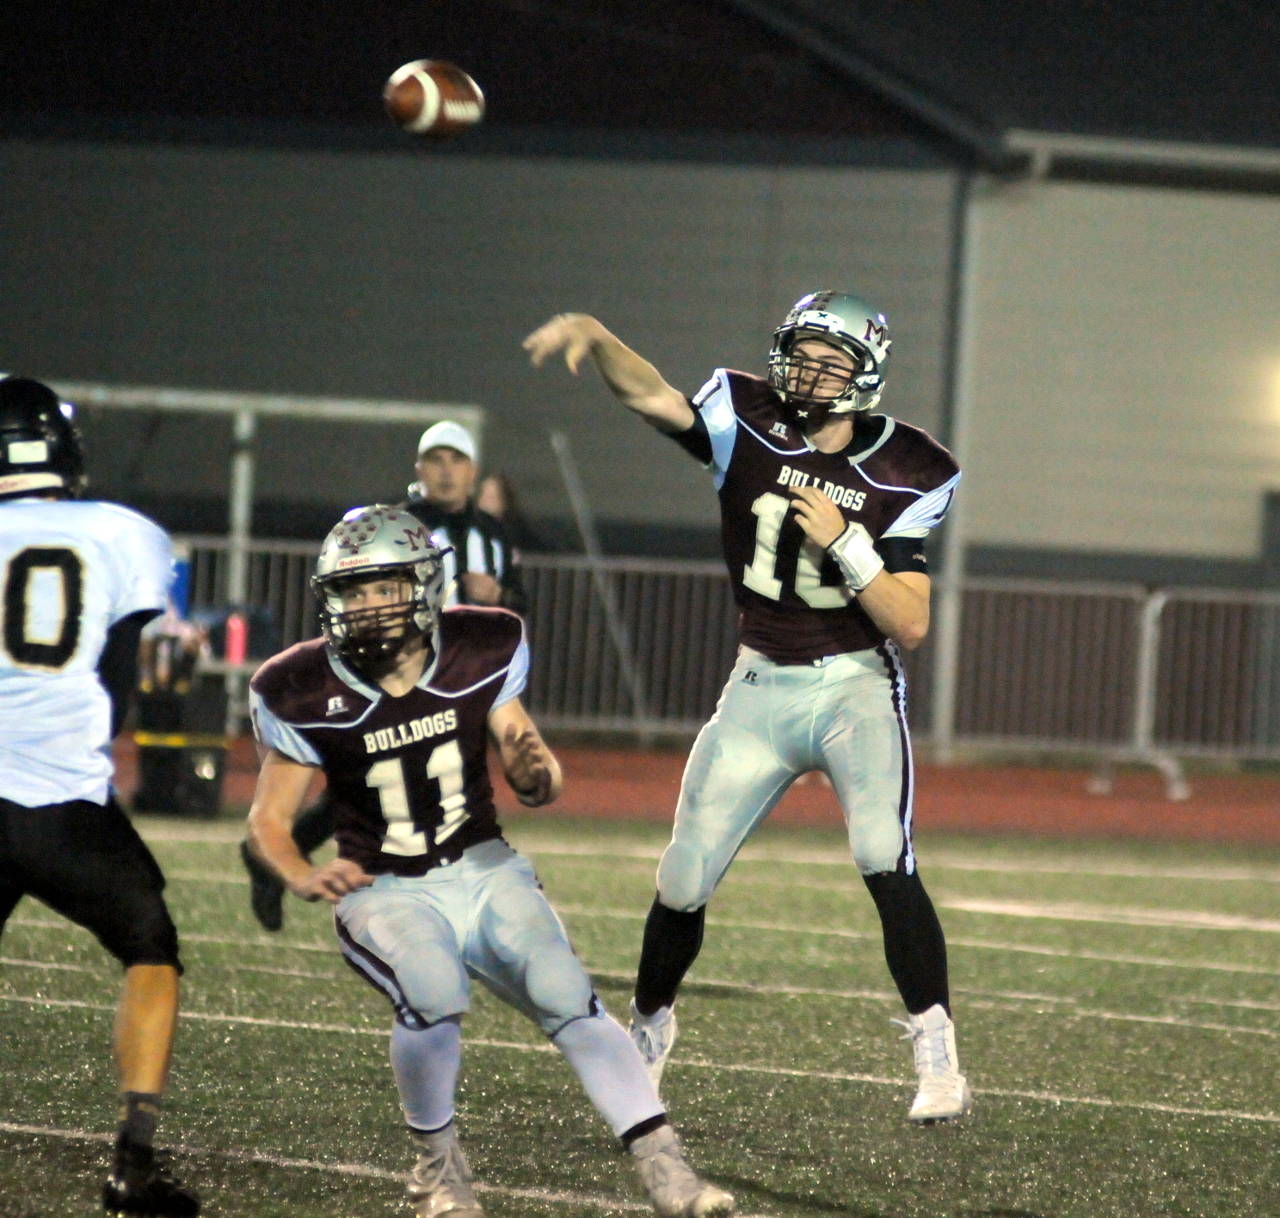 Montesano quarterback Trace Ridgway throws a pass during the Bulldogs’ 58-14 win over Meridian in the first round of the 1A State Football Tournament on Friday in Montesano. Ridgway threw for 186 yards and four touchdowns in the victory. (Ryan Sparks | Grays Harbor News Group)